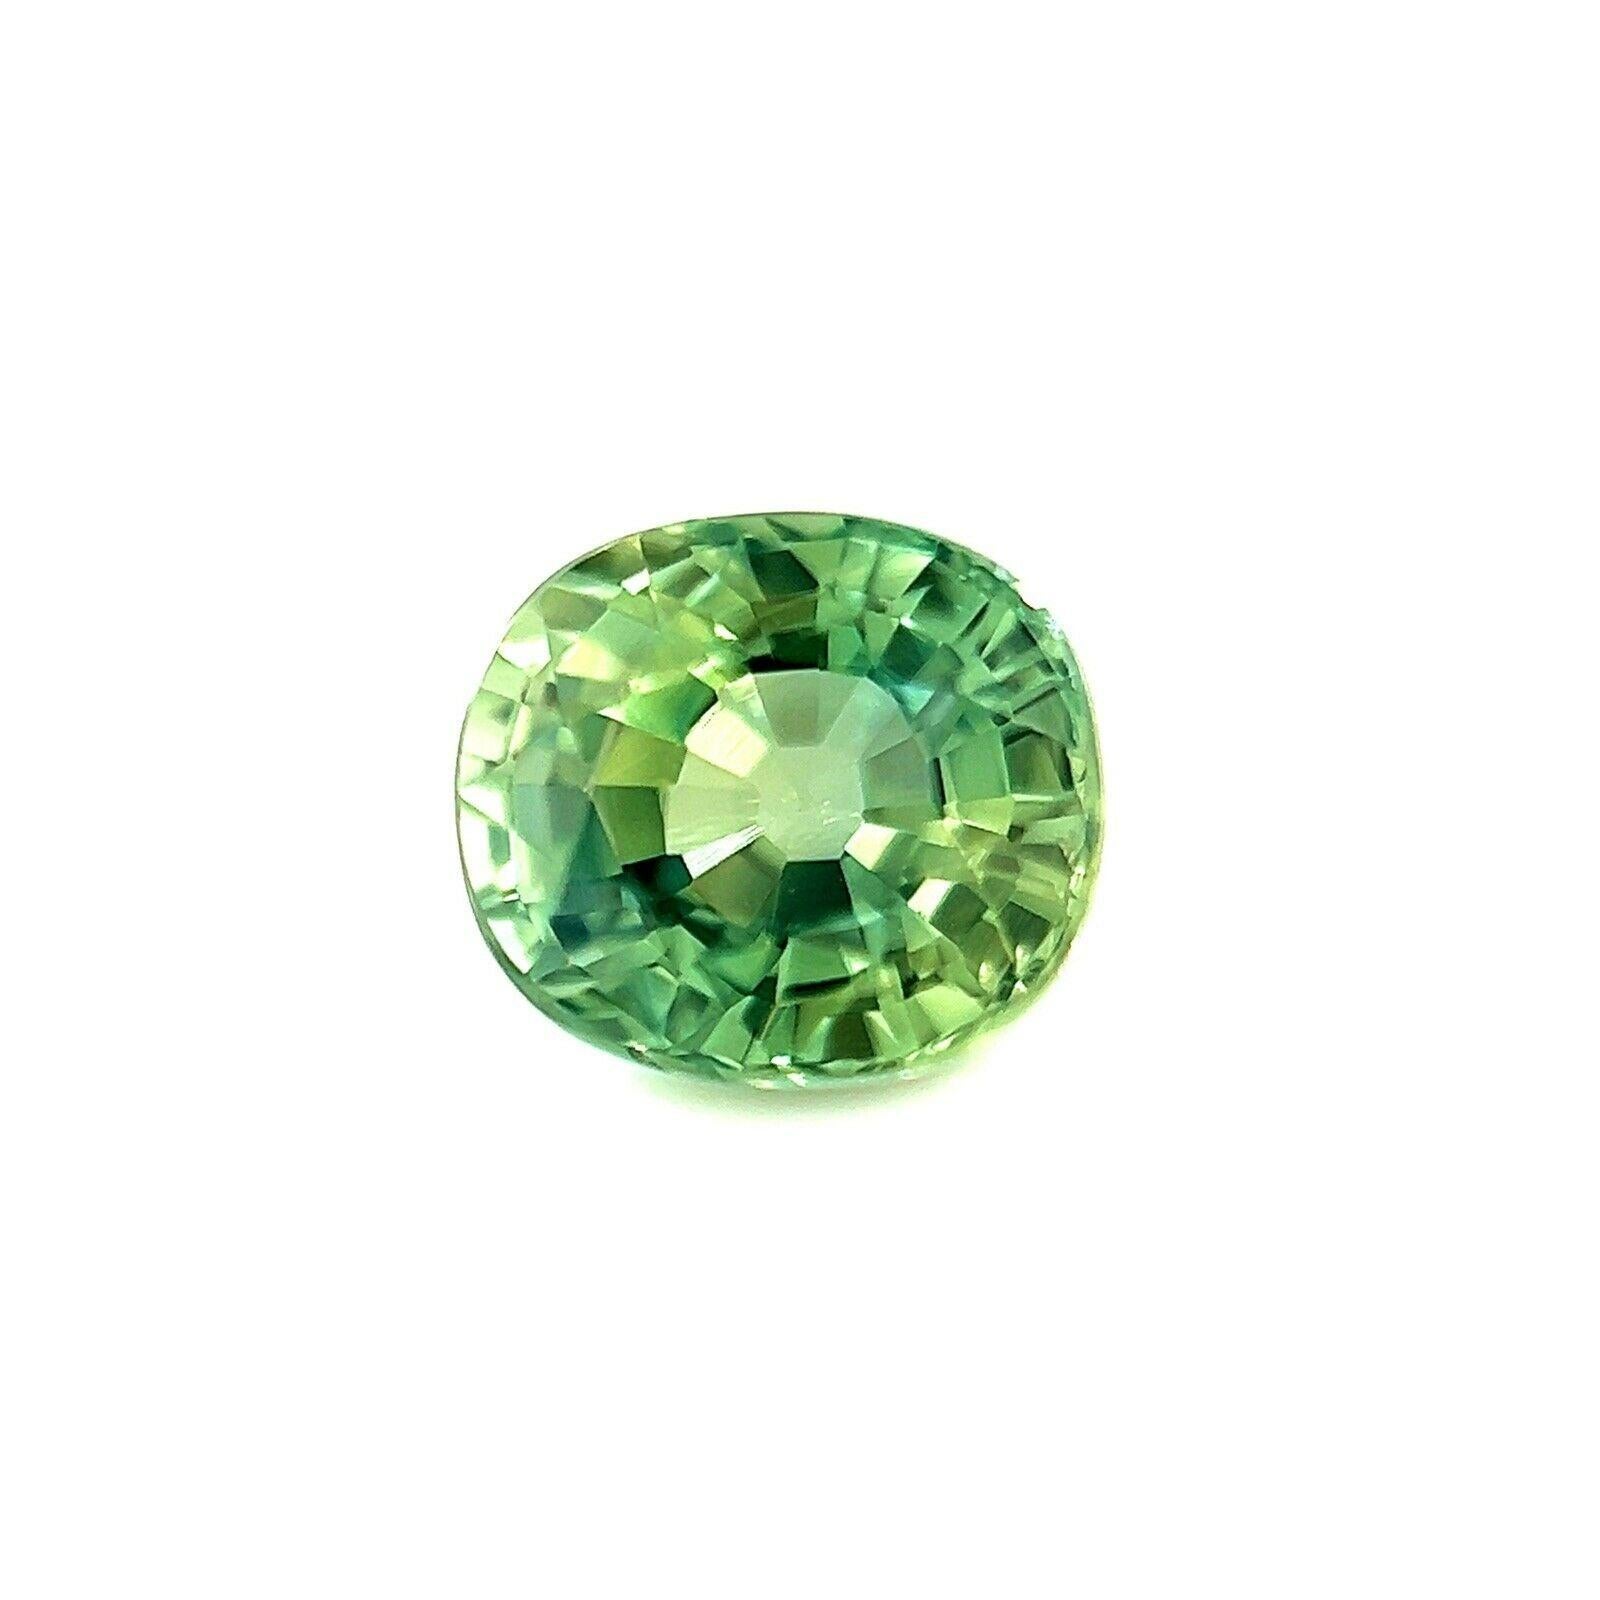 Natural 1.02ct Vivid Green Yellow Australian Sapphire Oval Cut Loose Gem 5.8x5mm 

Fine Natural Vivid Green Australian Sapphire Oval Cut Gemstone.
1.02 Carat with a beautiful and unique vivid yellow green colour and excellent clarity, very clean